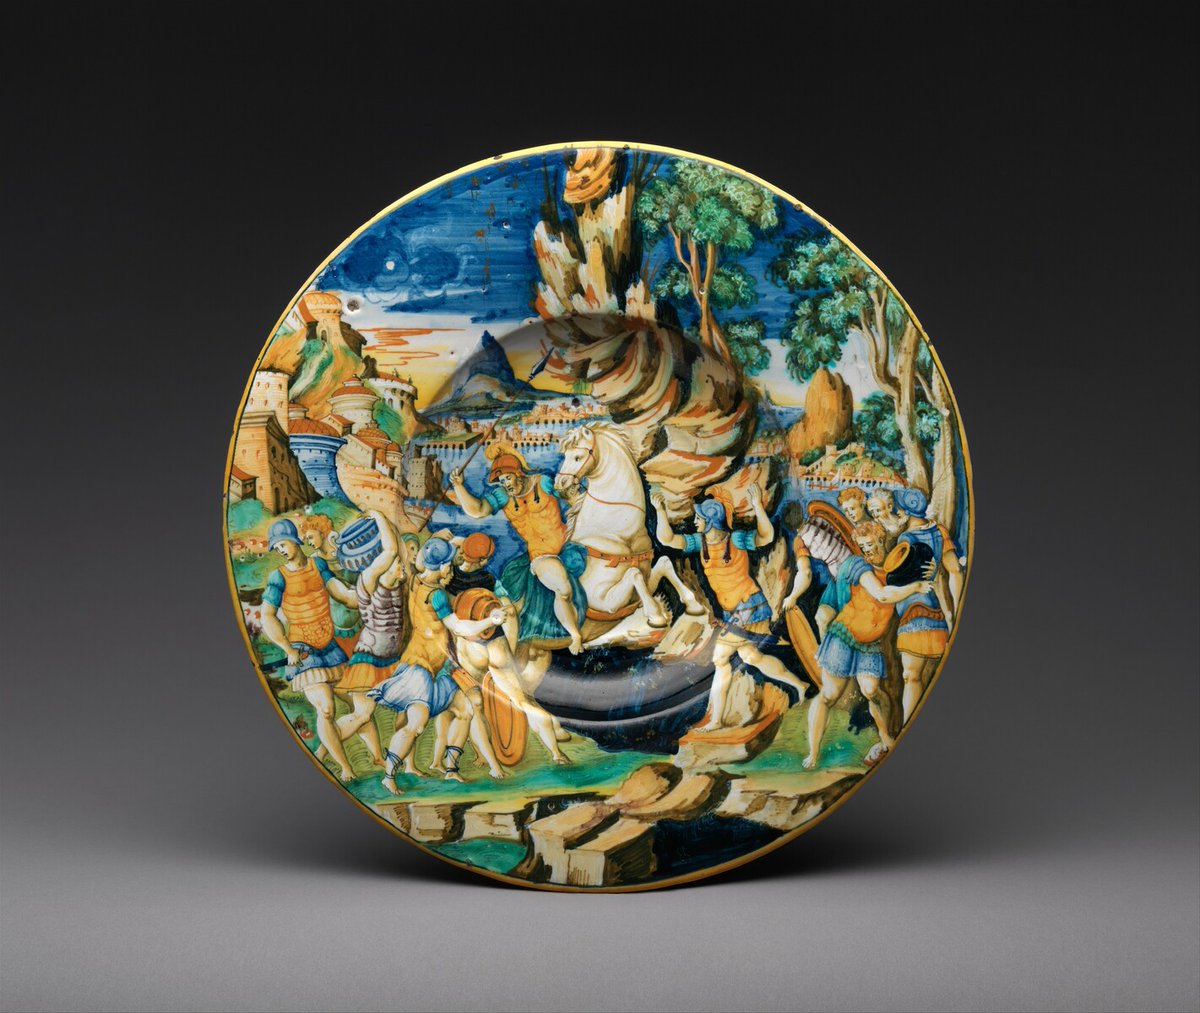 Guido de Merlino, Dish with The Heroism of Marcus Curtius, 1542 #europeanart #guidodemerlino metmuseum.org/art/collection…